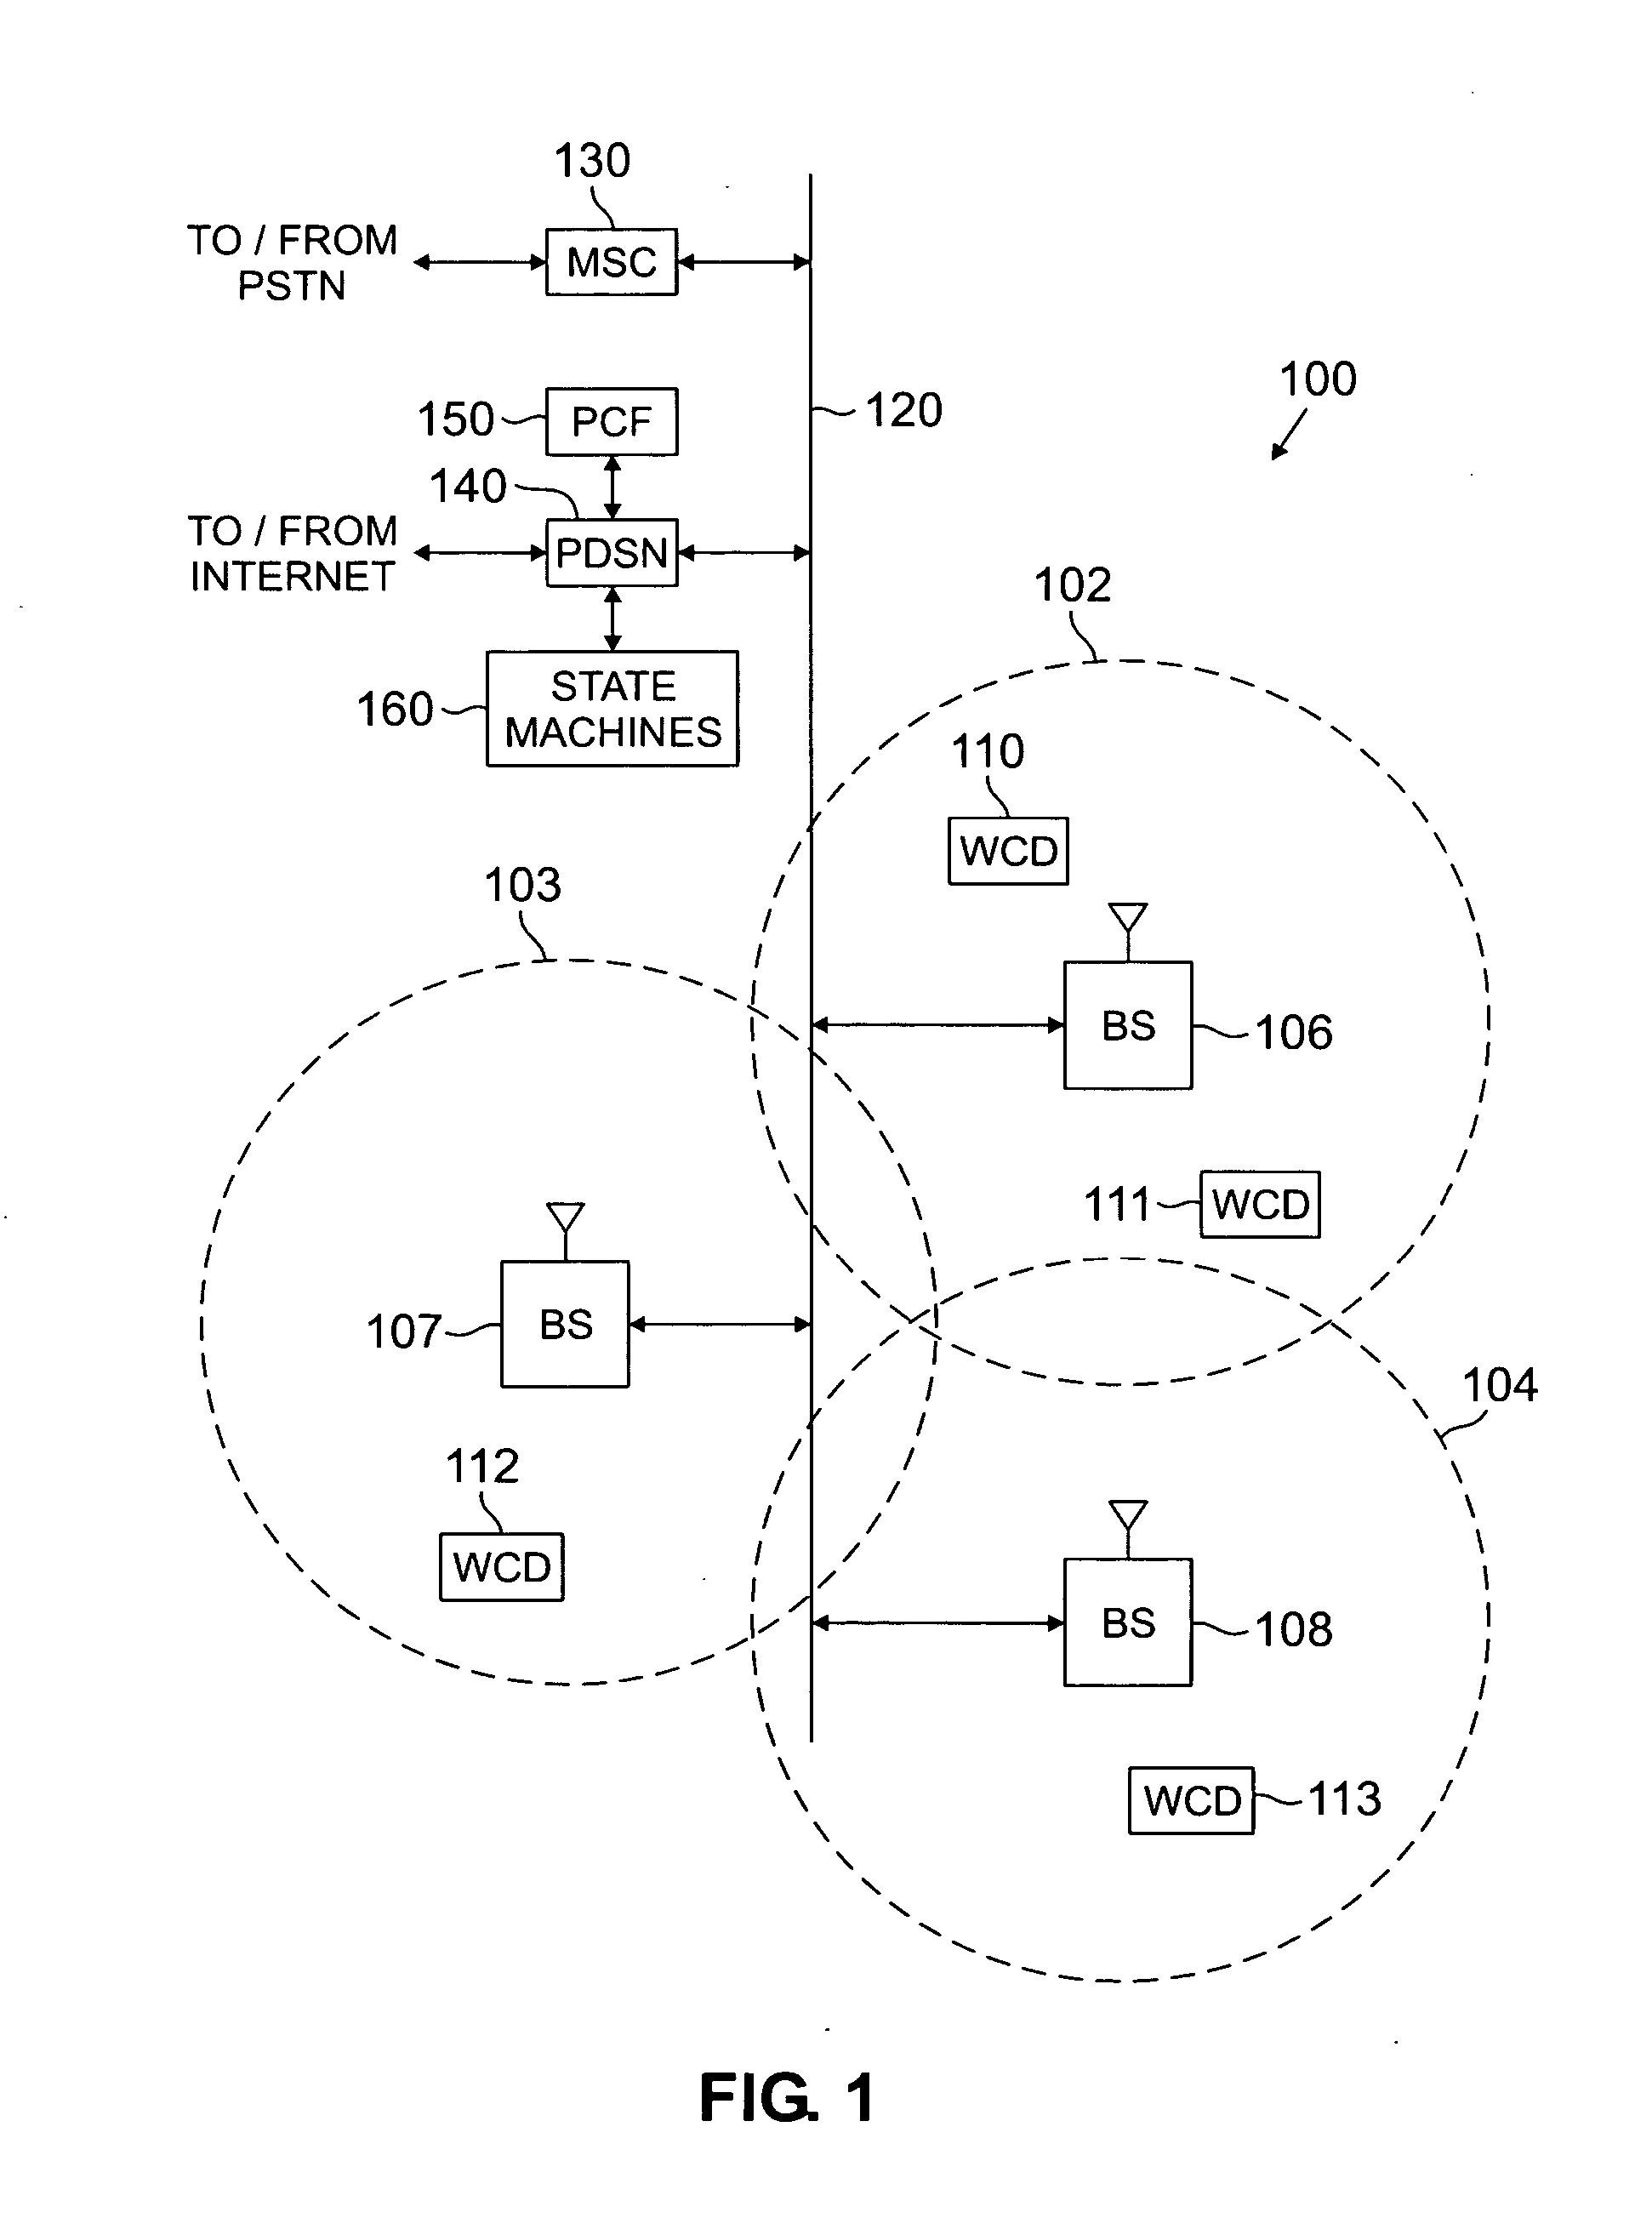 Method and system for assigning servers based on server status in a wireless network